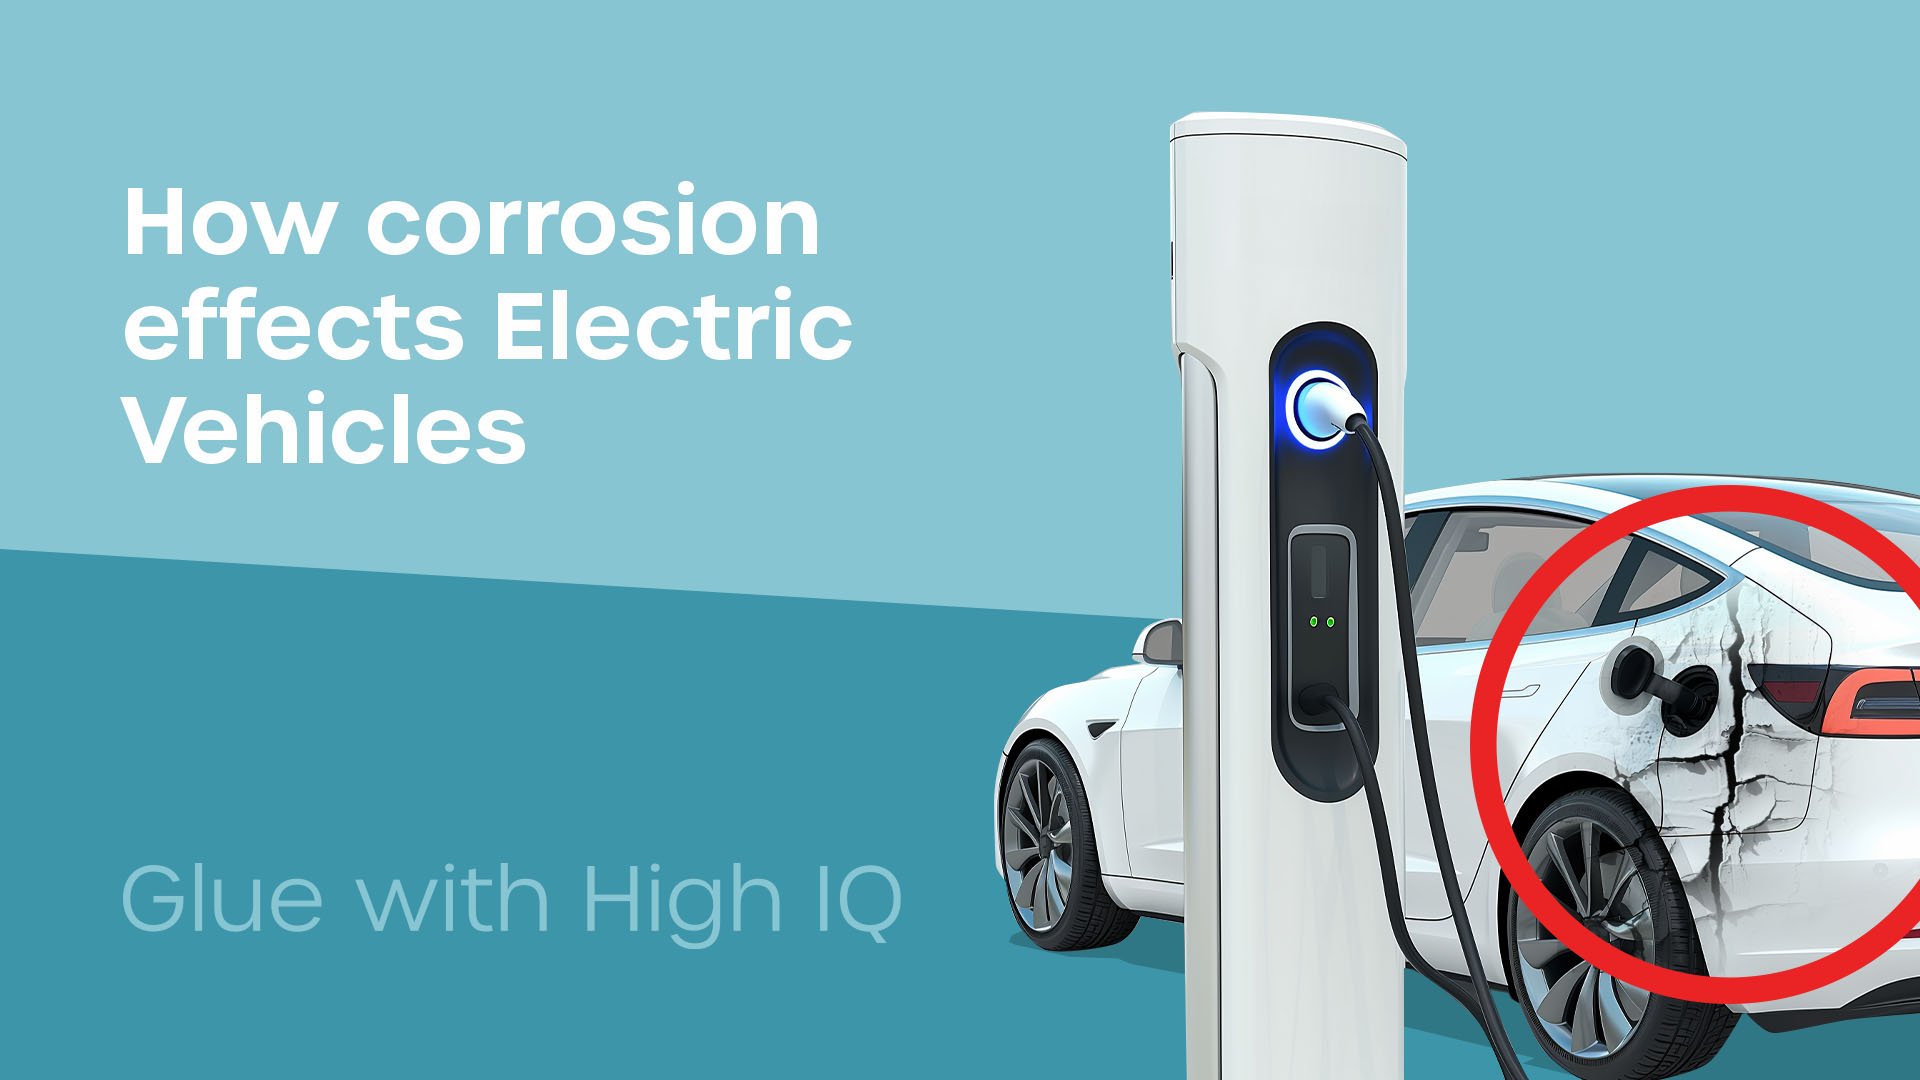 Mitigating the effects of corrosion in electric vehicles